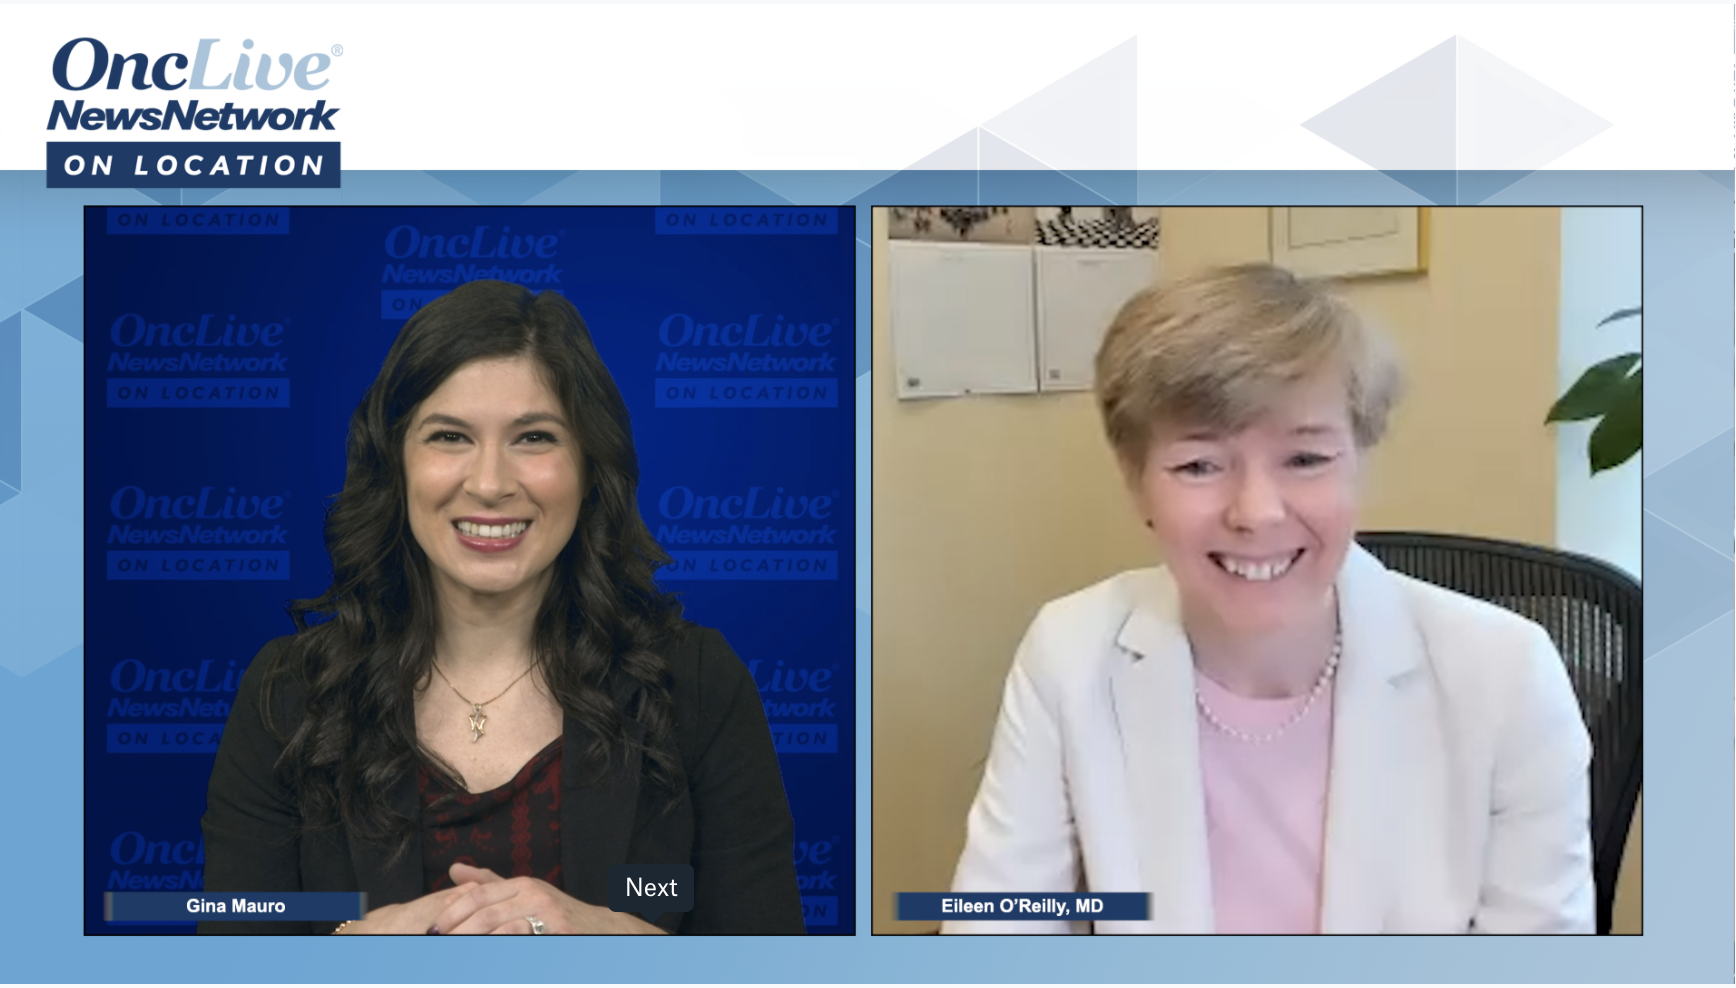 Gina Mauro, OncLive, and Eileen O'Reilly, MD, of Memorial Sloan Kettering Cancer Center 